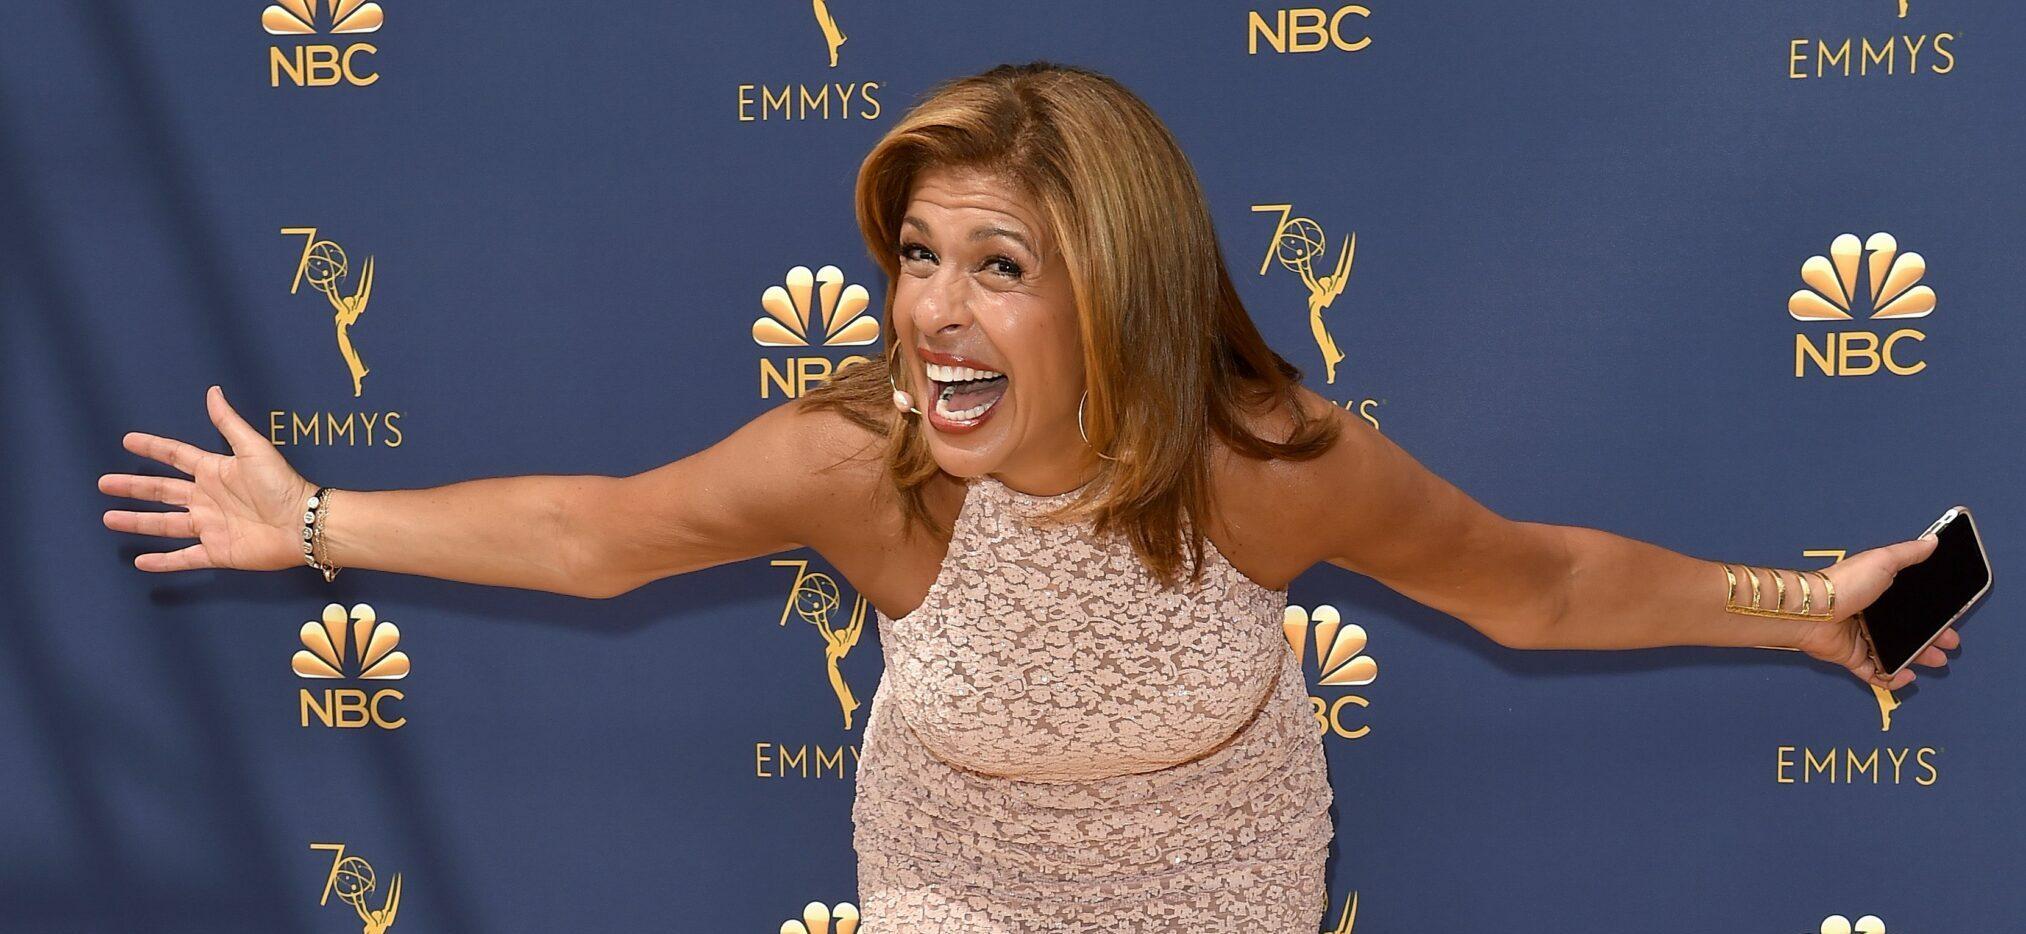 Hoda Kotb Away From ‘Today’ AGAIN, Two Weeks After Daughter’s Health Scare